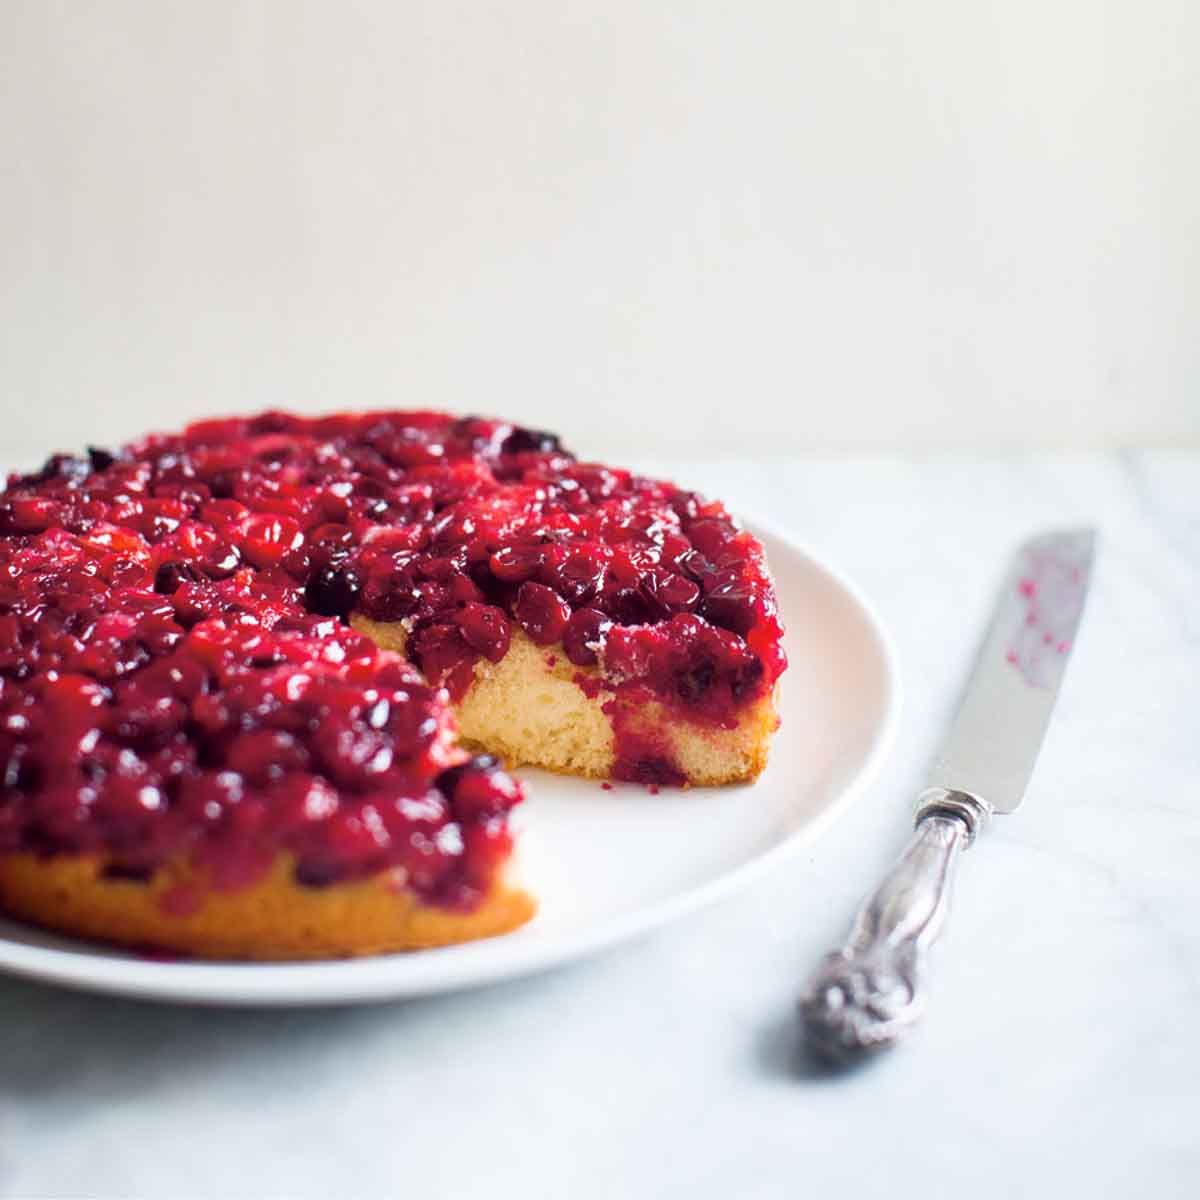 Cranberry upside-down cake with a large piece missing, on a white plate with a serving knife beside it.